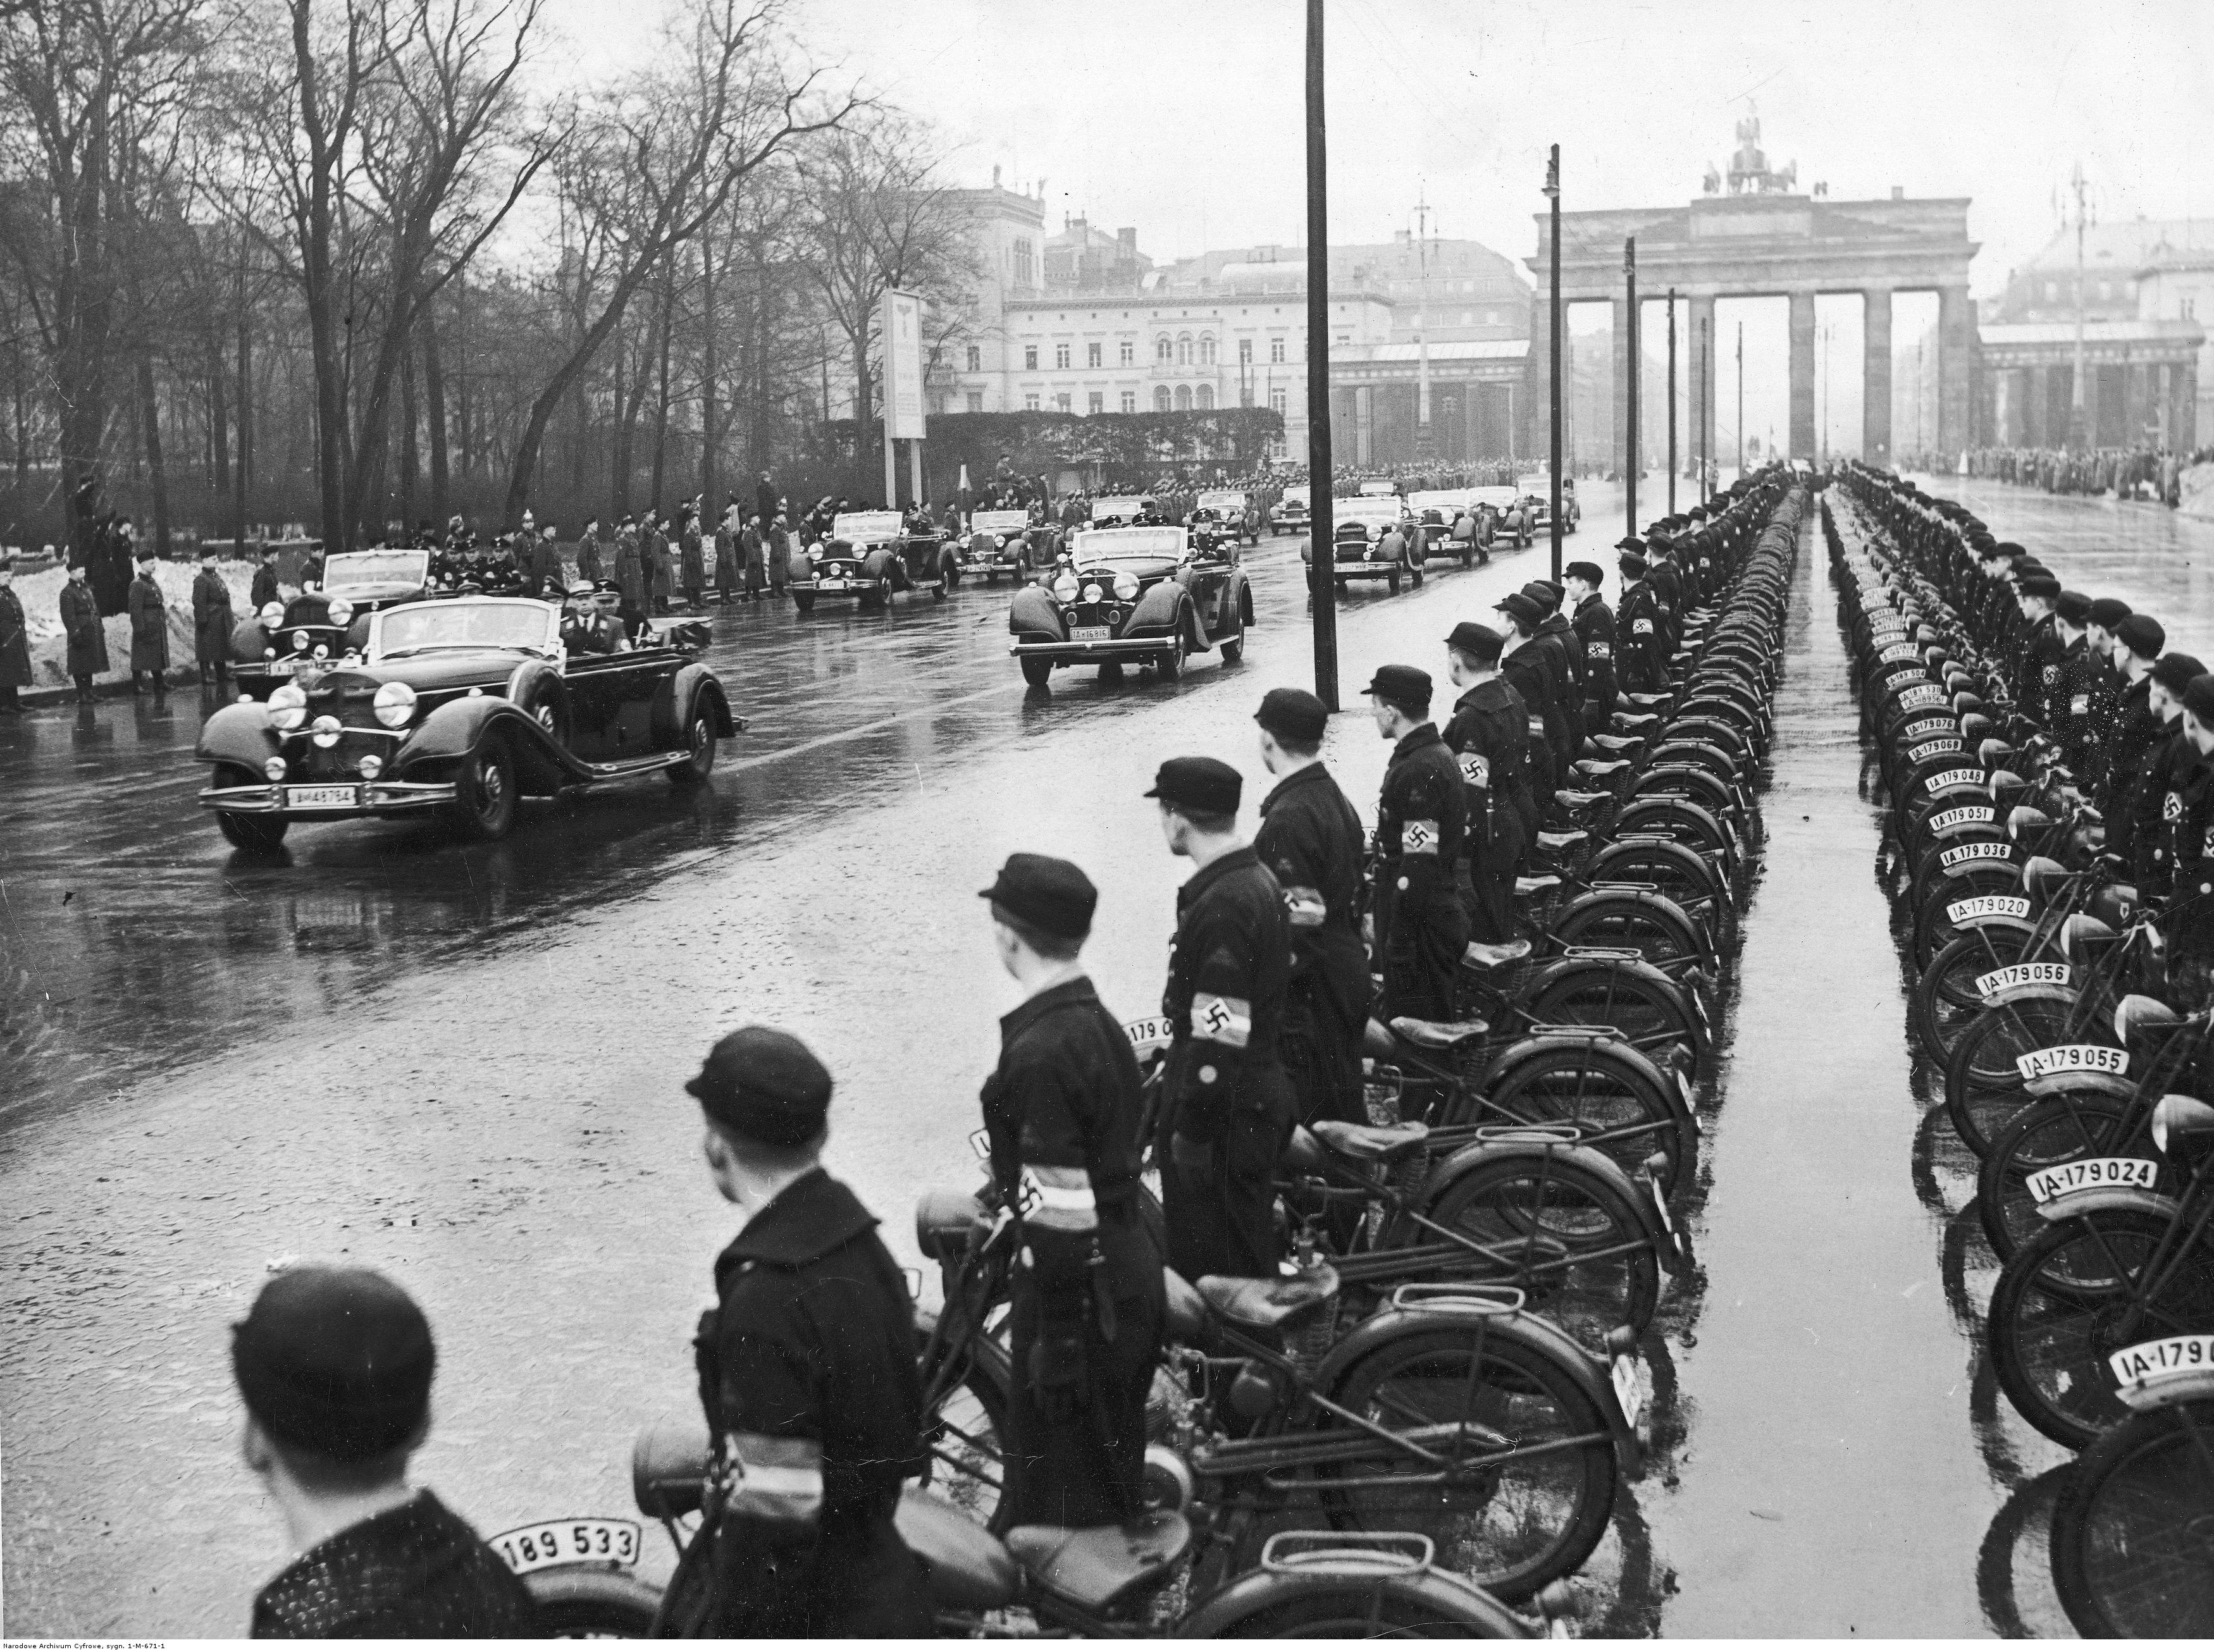 Adolf Hitler arrives at the international automobile show in front of the Brandeburg gate in Berlin, along a parade of 20000 NSKK members